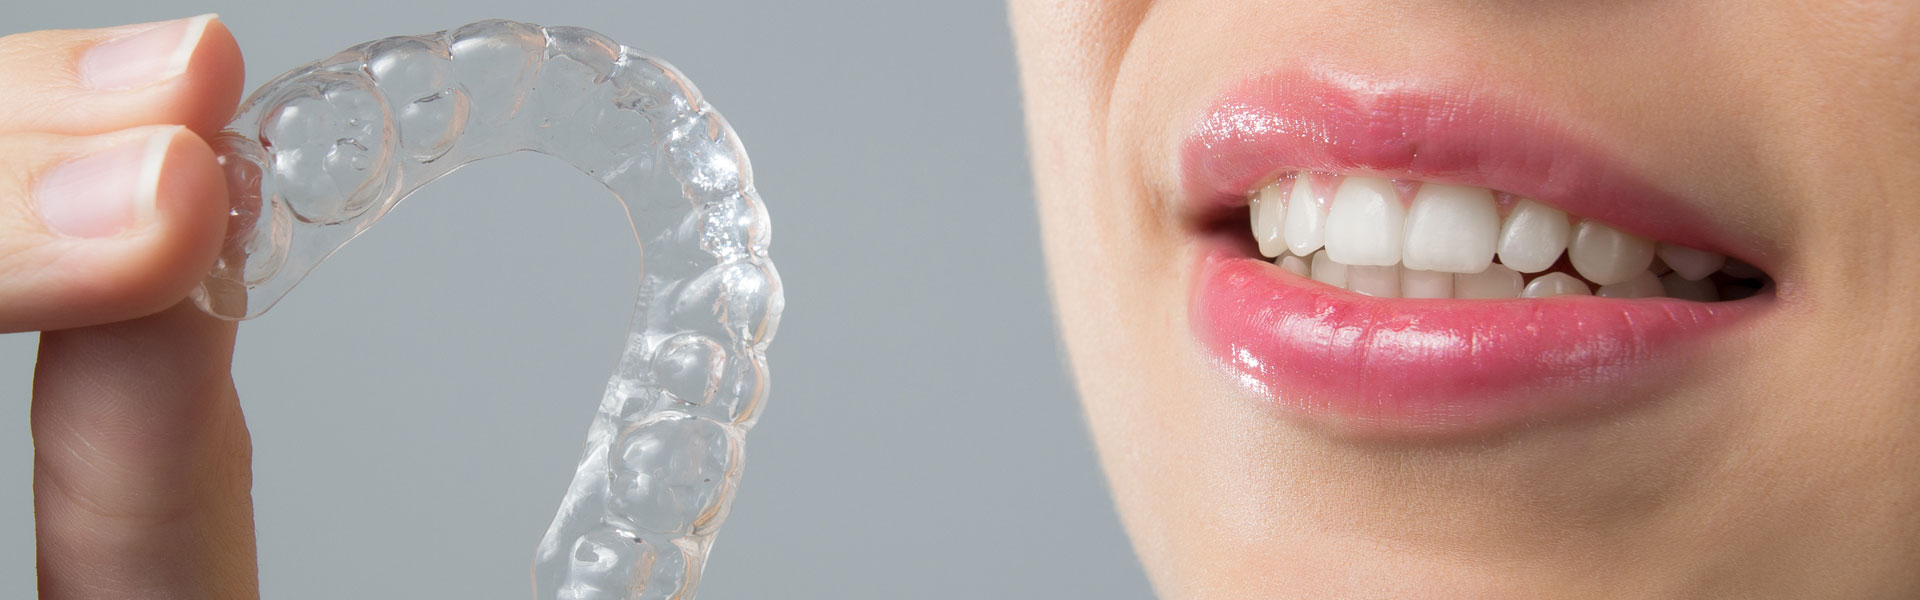 Woman holding an invisalign